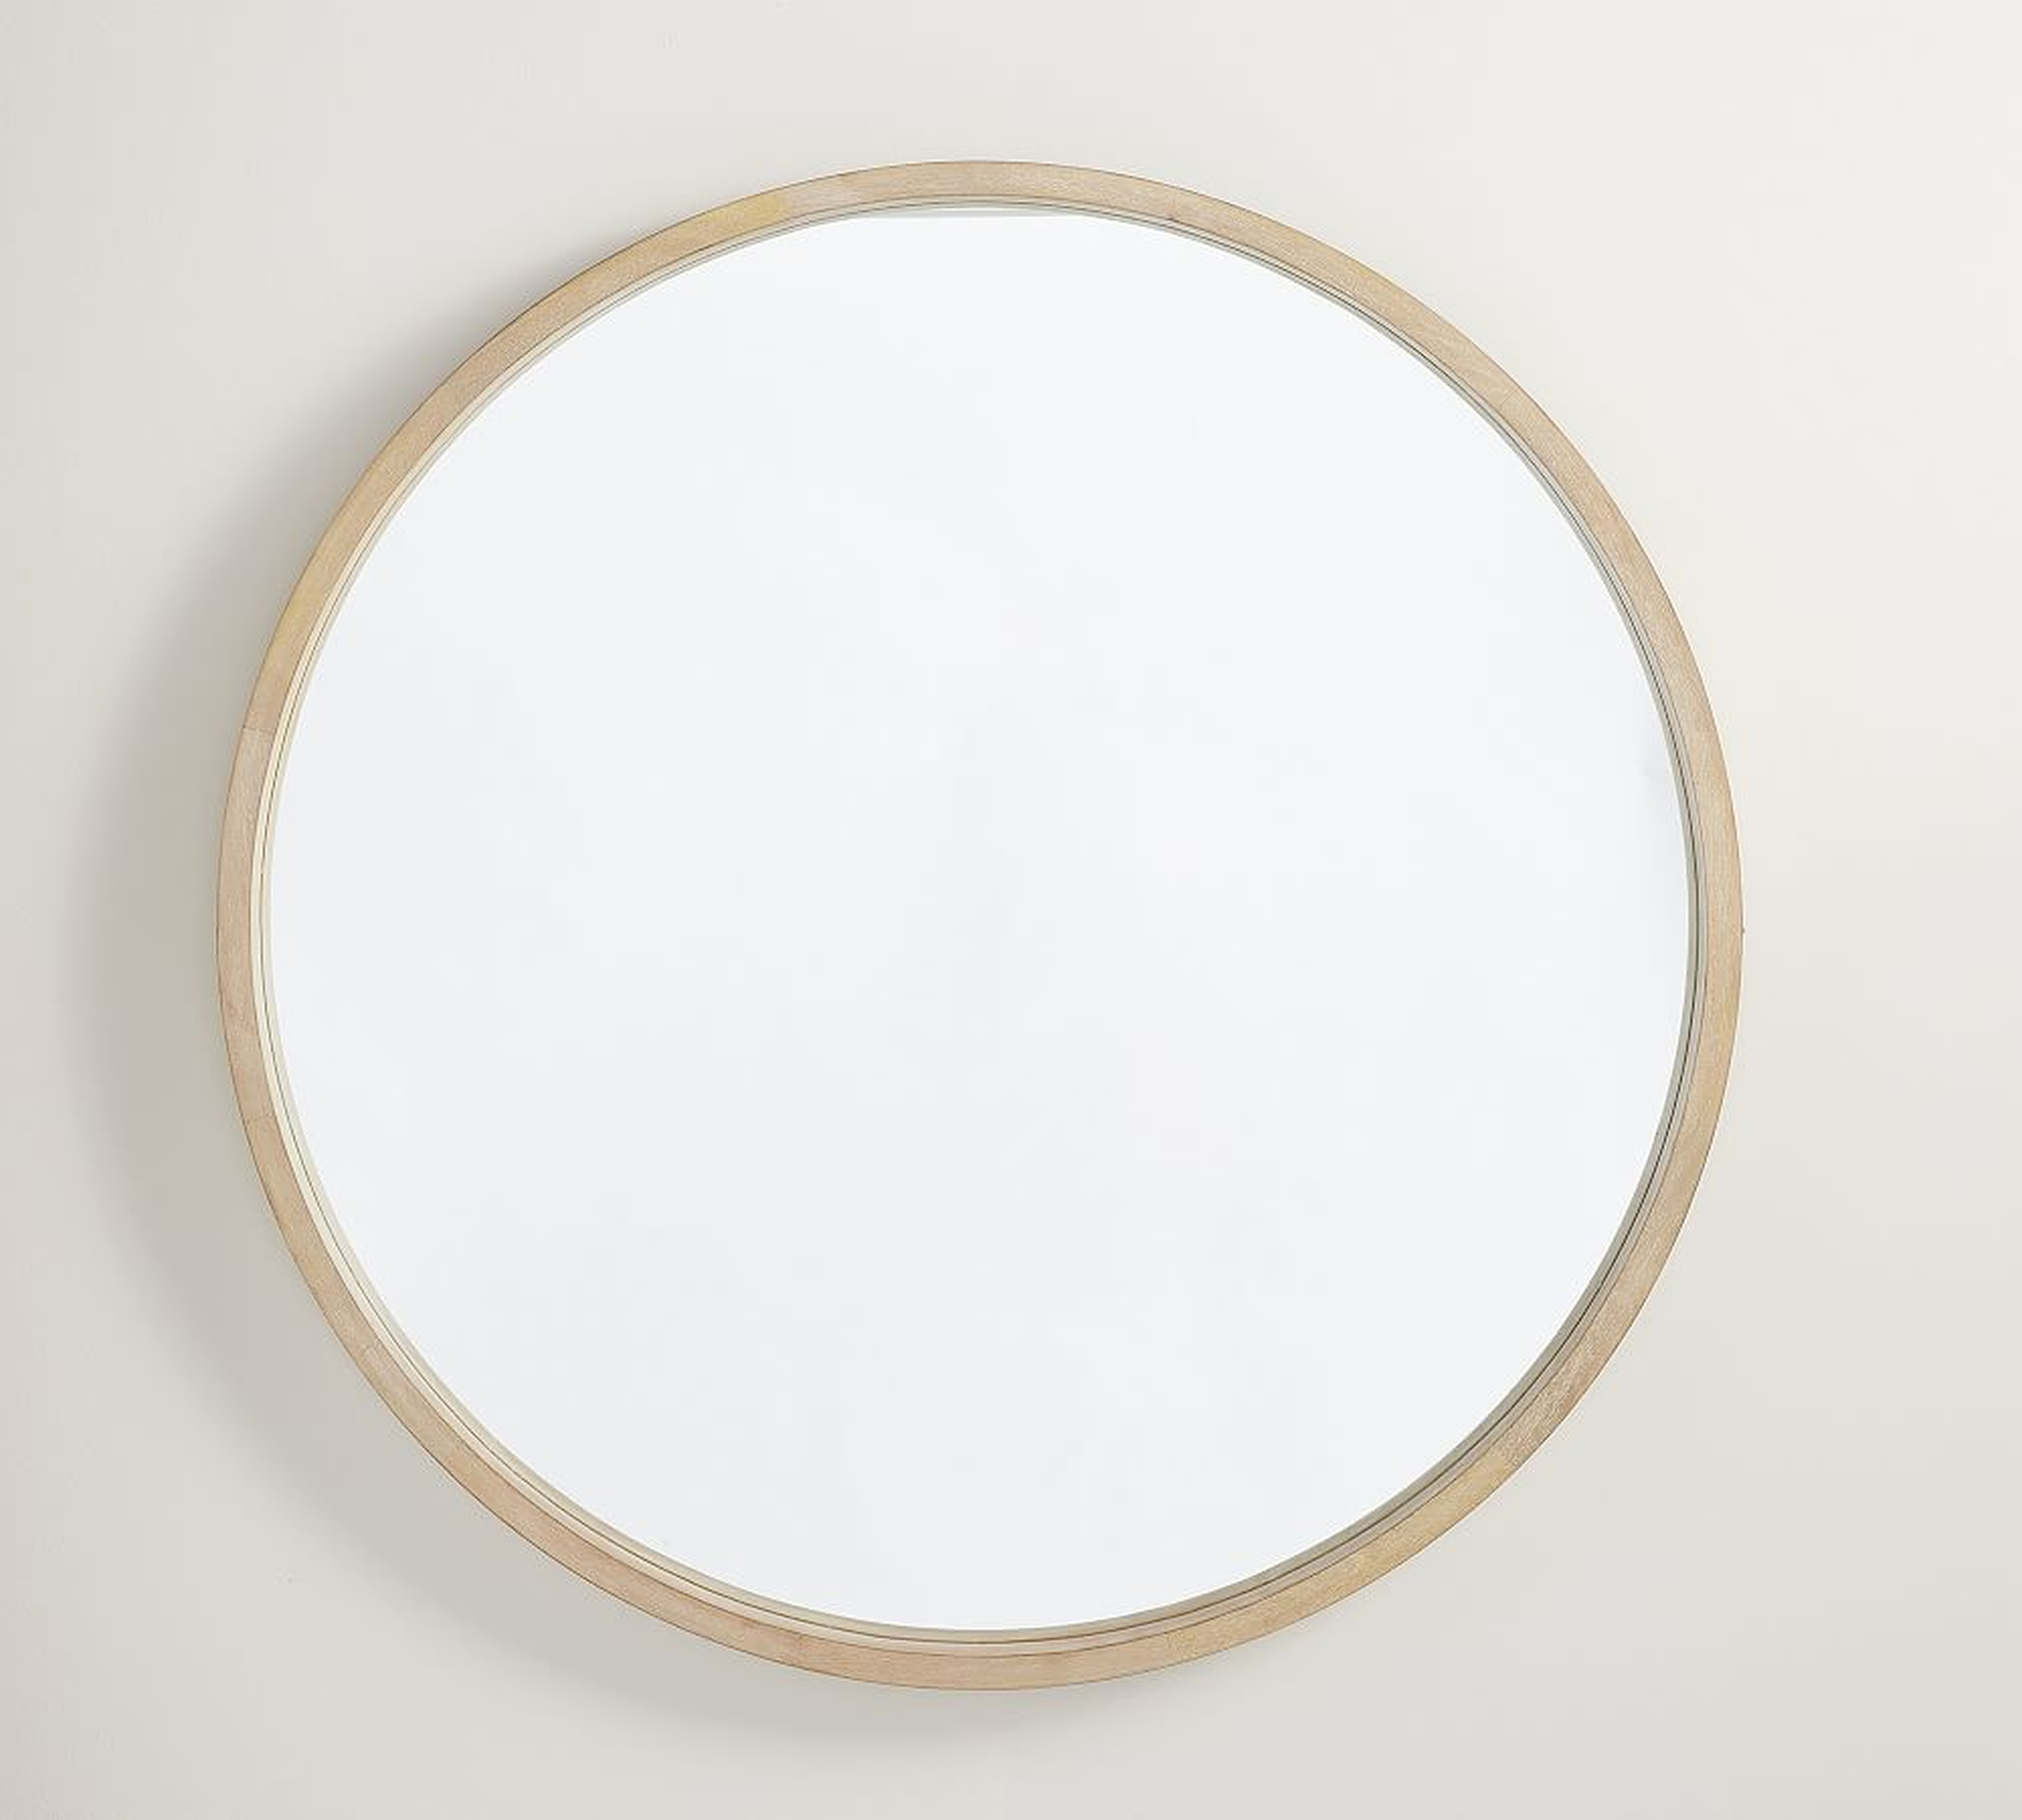 Cayman Mirror, Bleached Wood, 42" Round - Pottery Barn